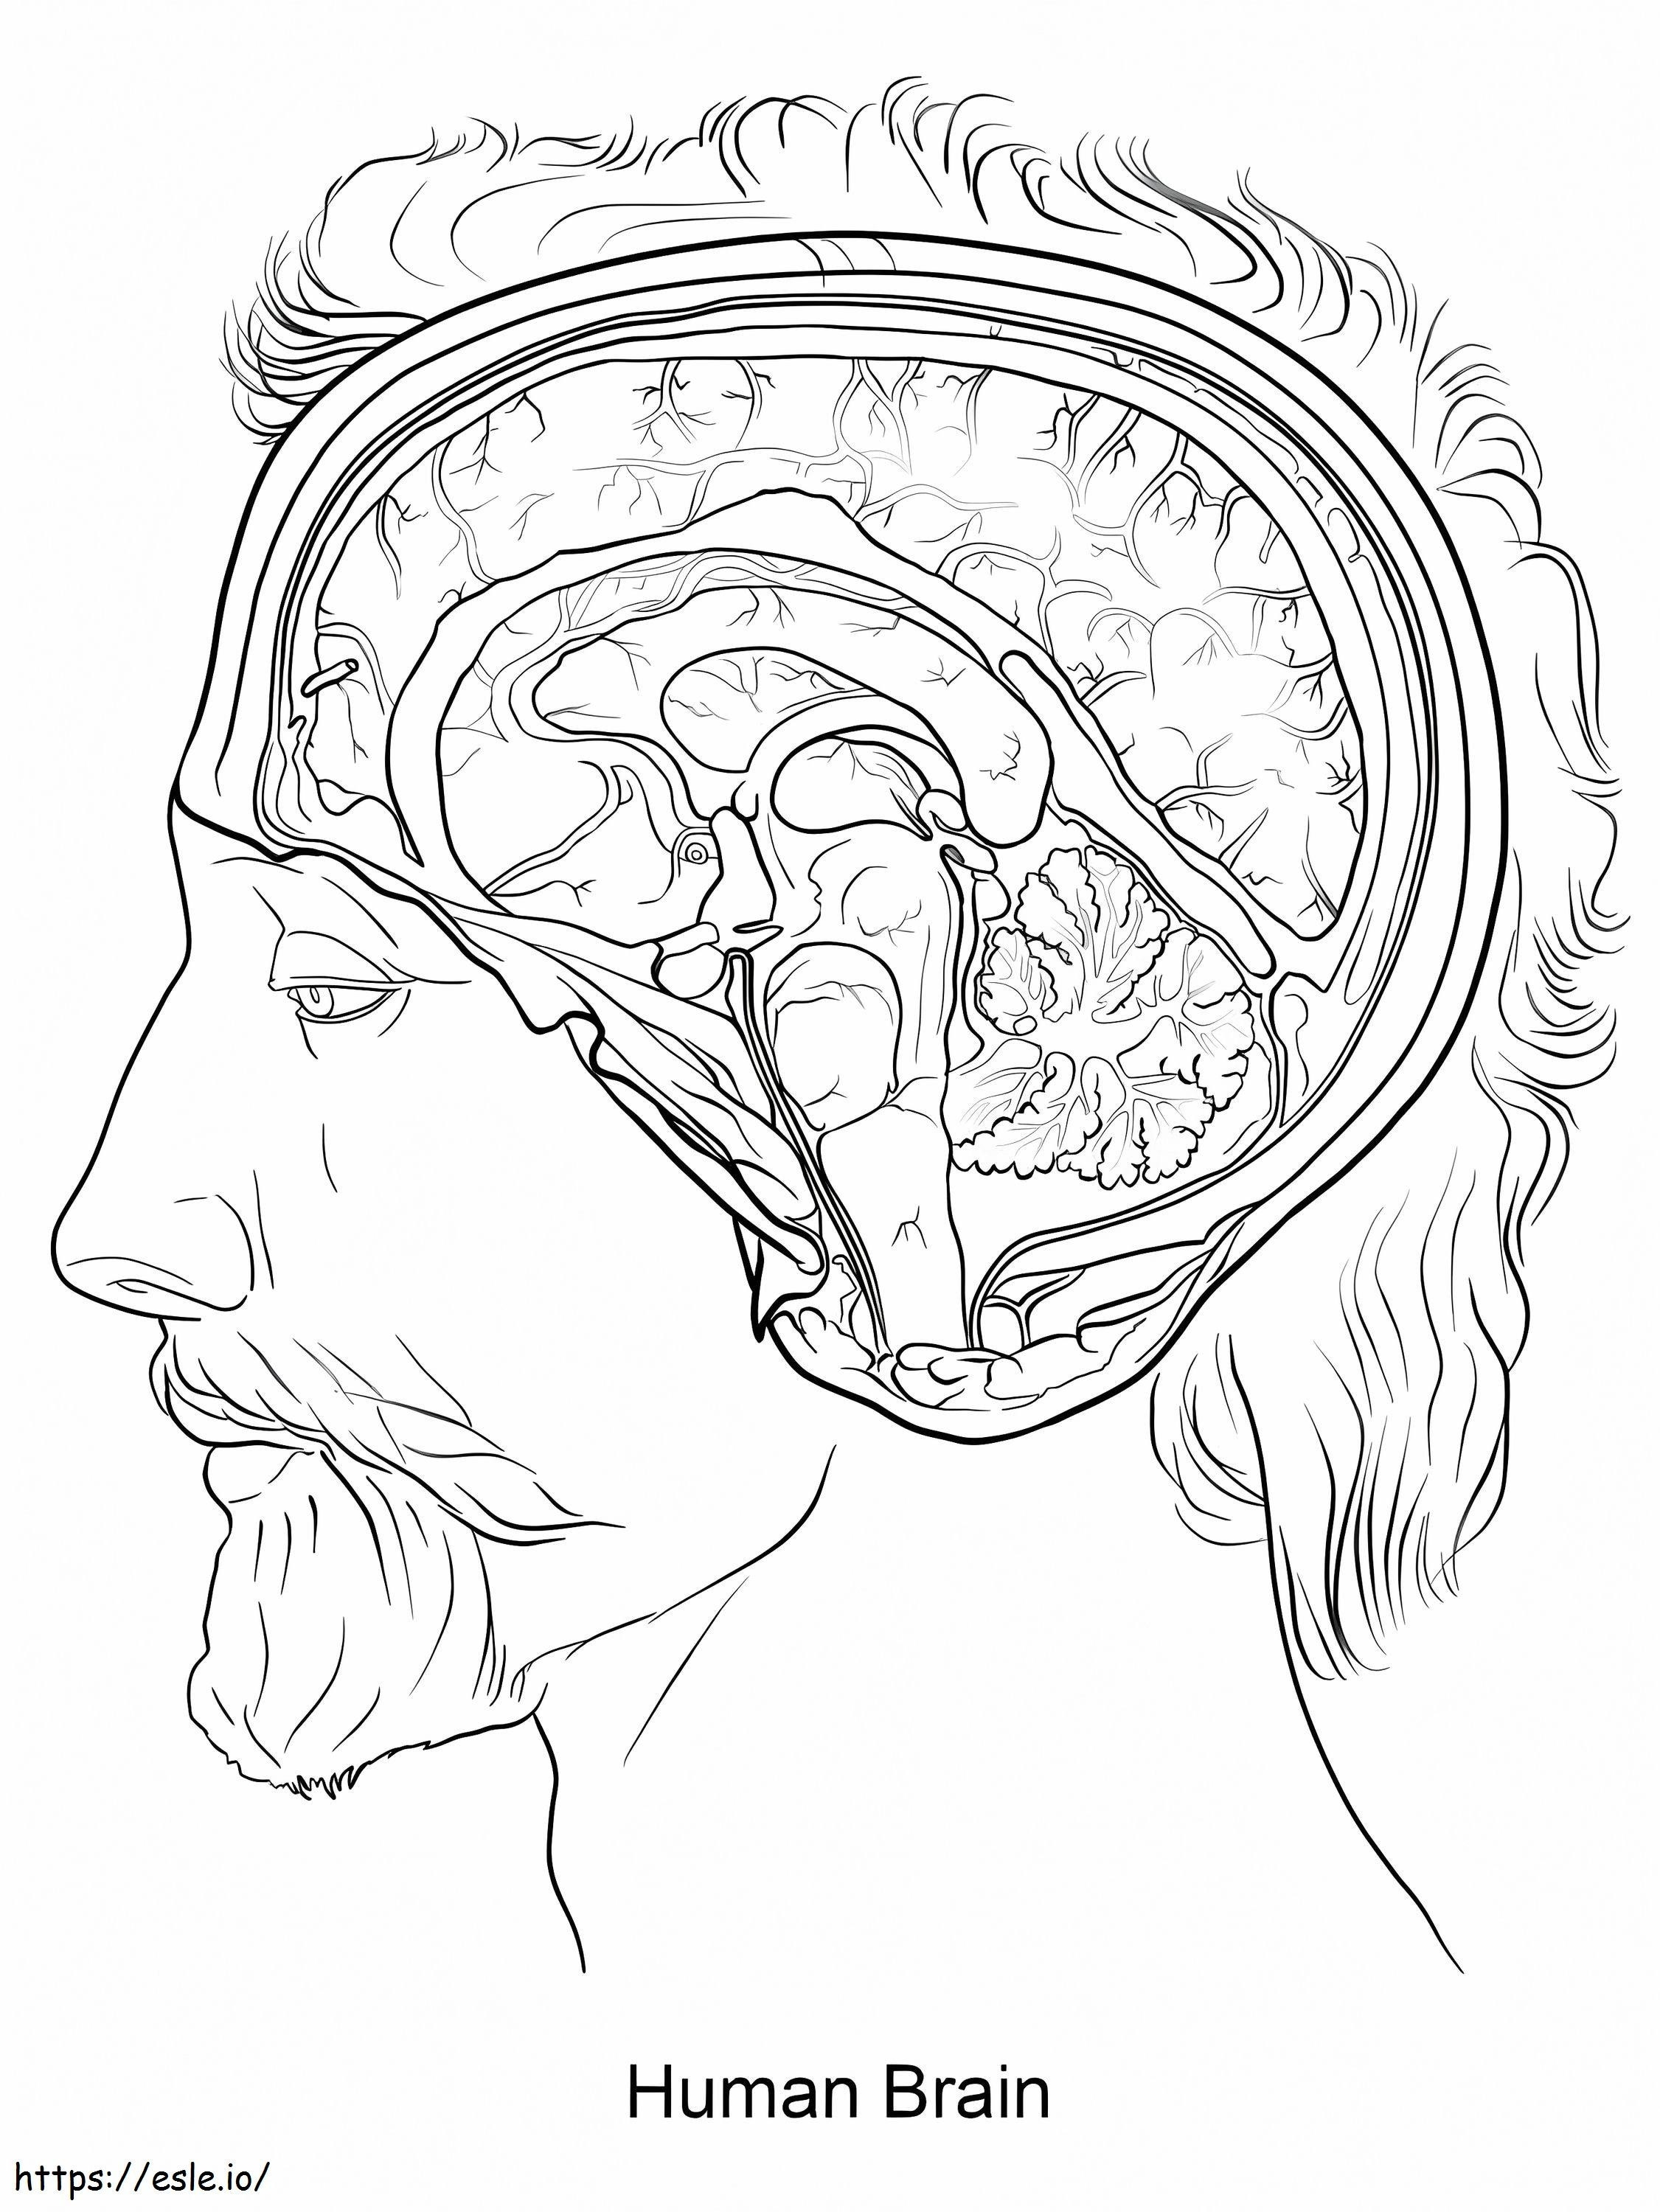 Human Brain 1 coloring page